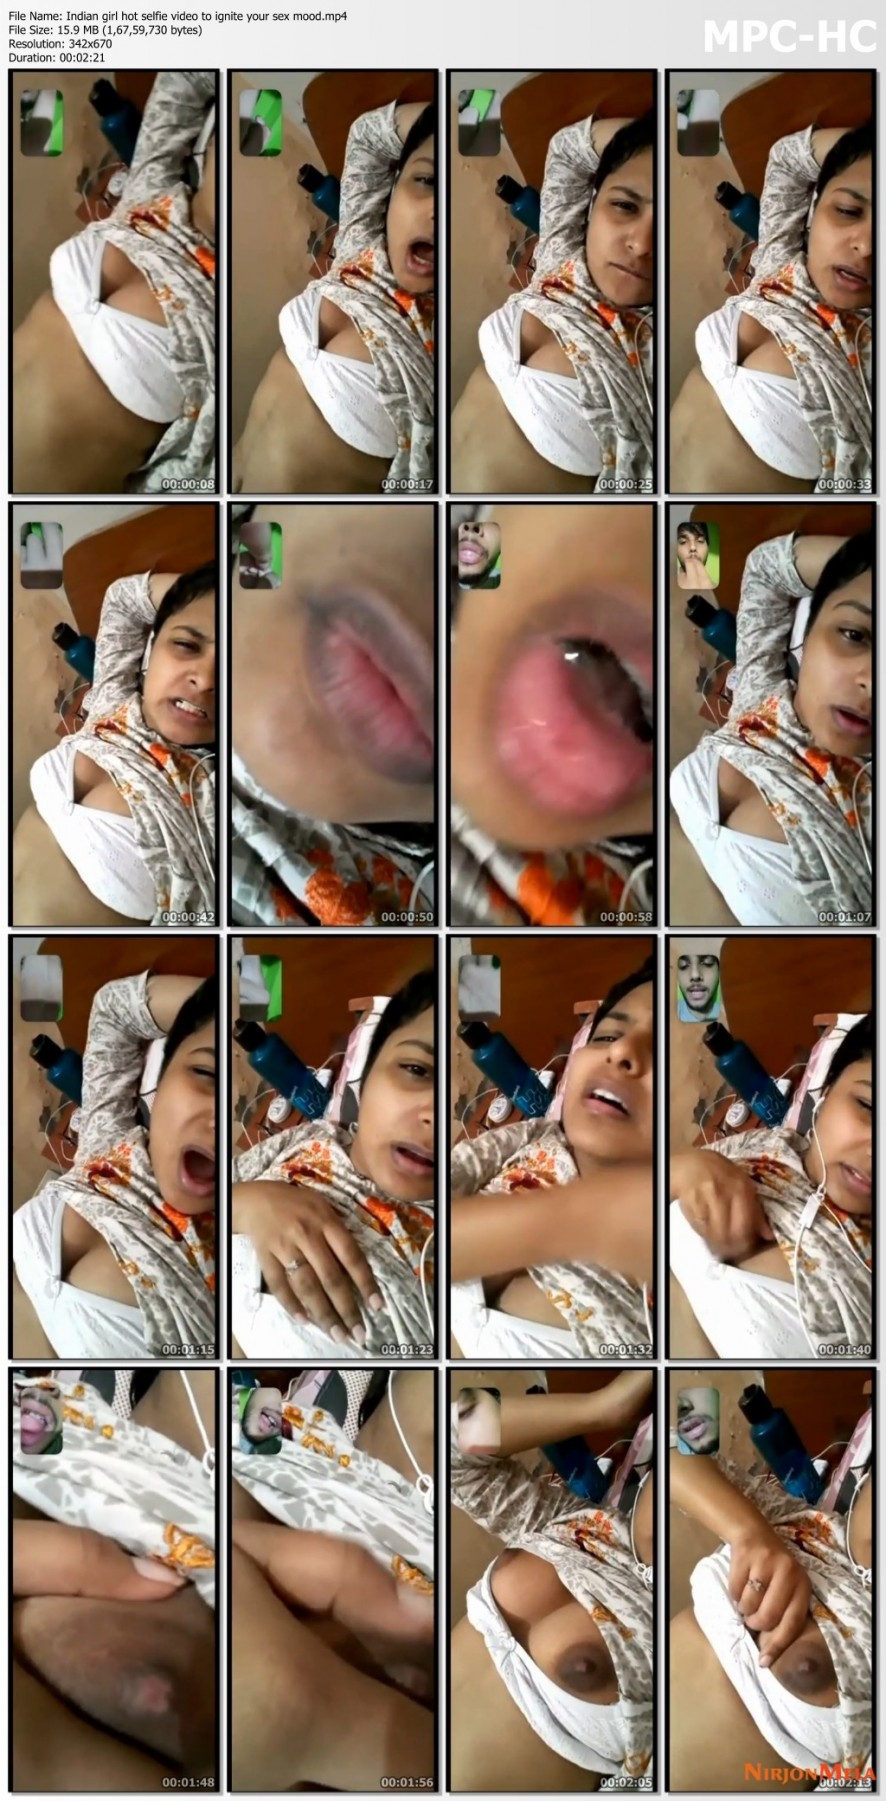 Indian-girl-hot-selfie-video-to-ignite-your-sex-mood.jpg